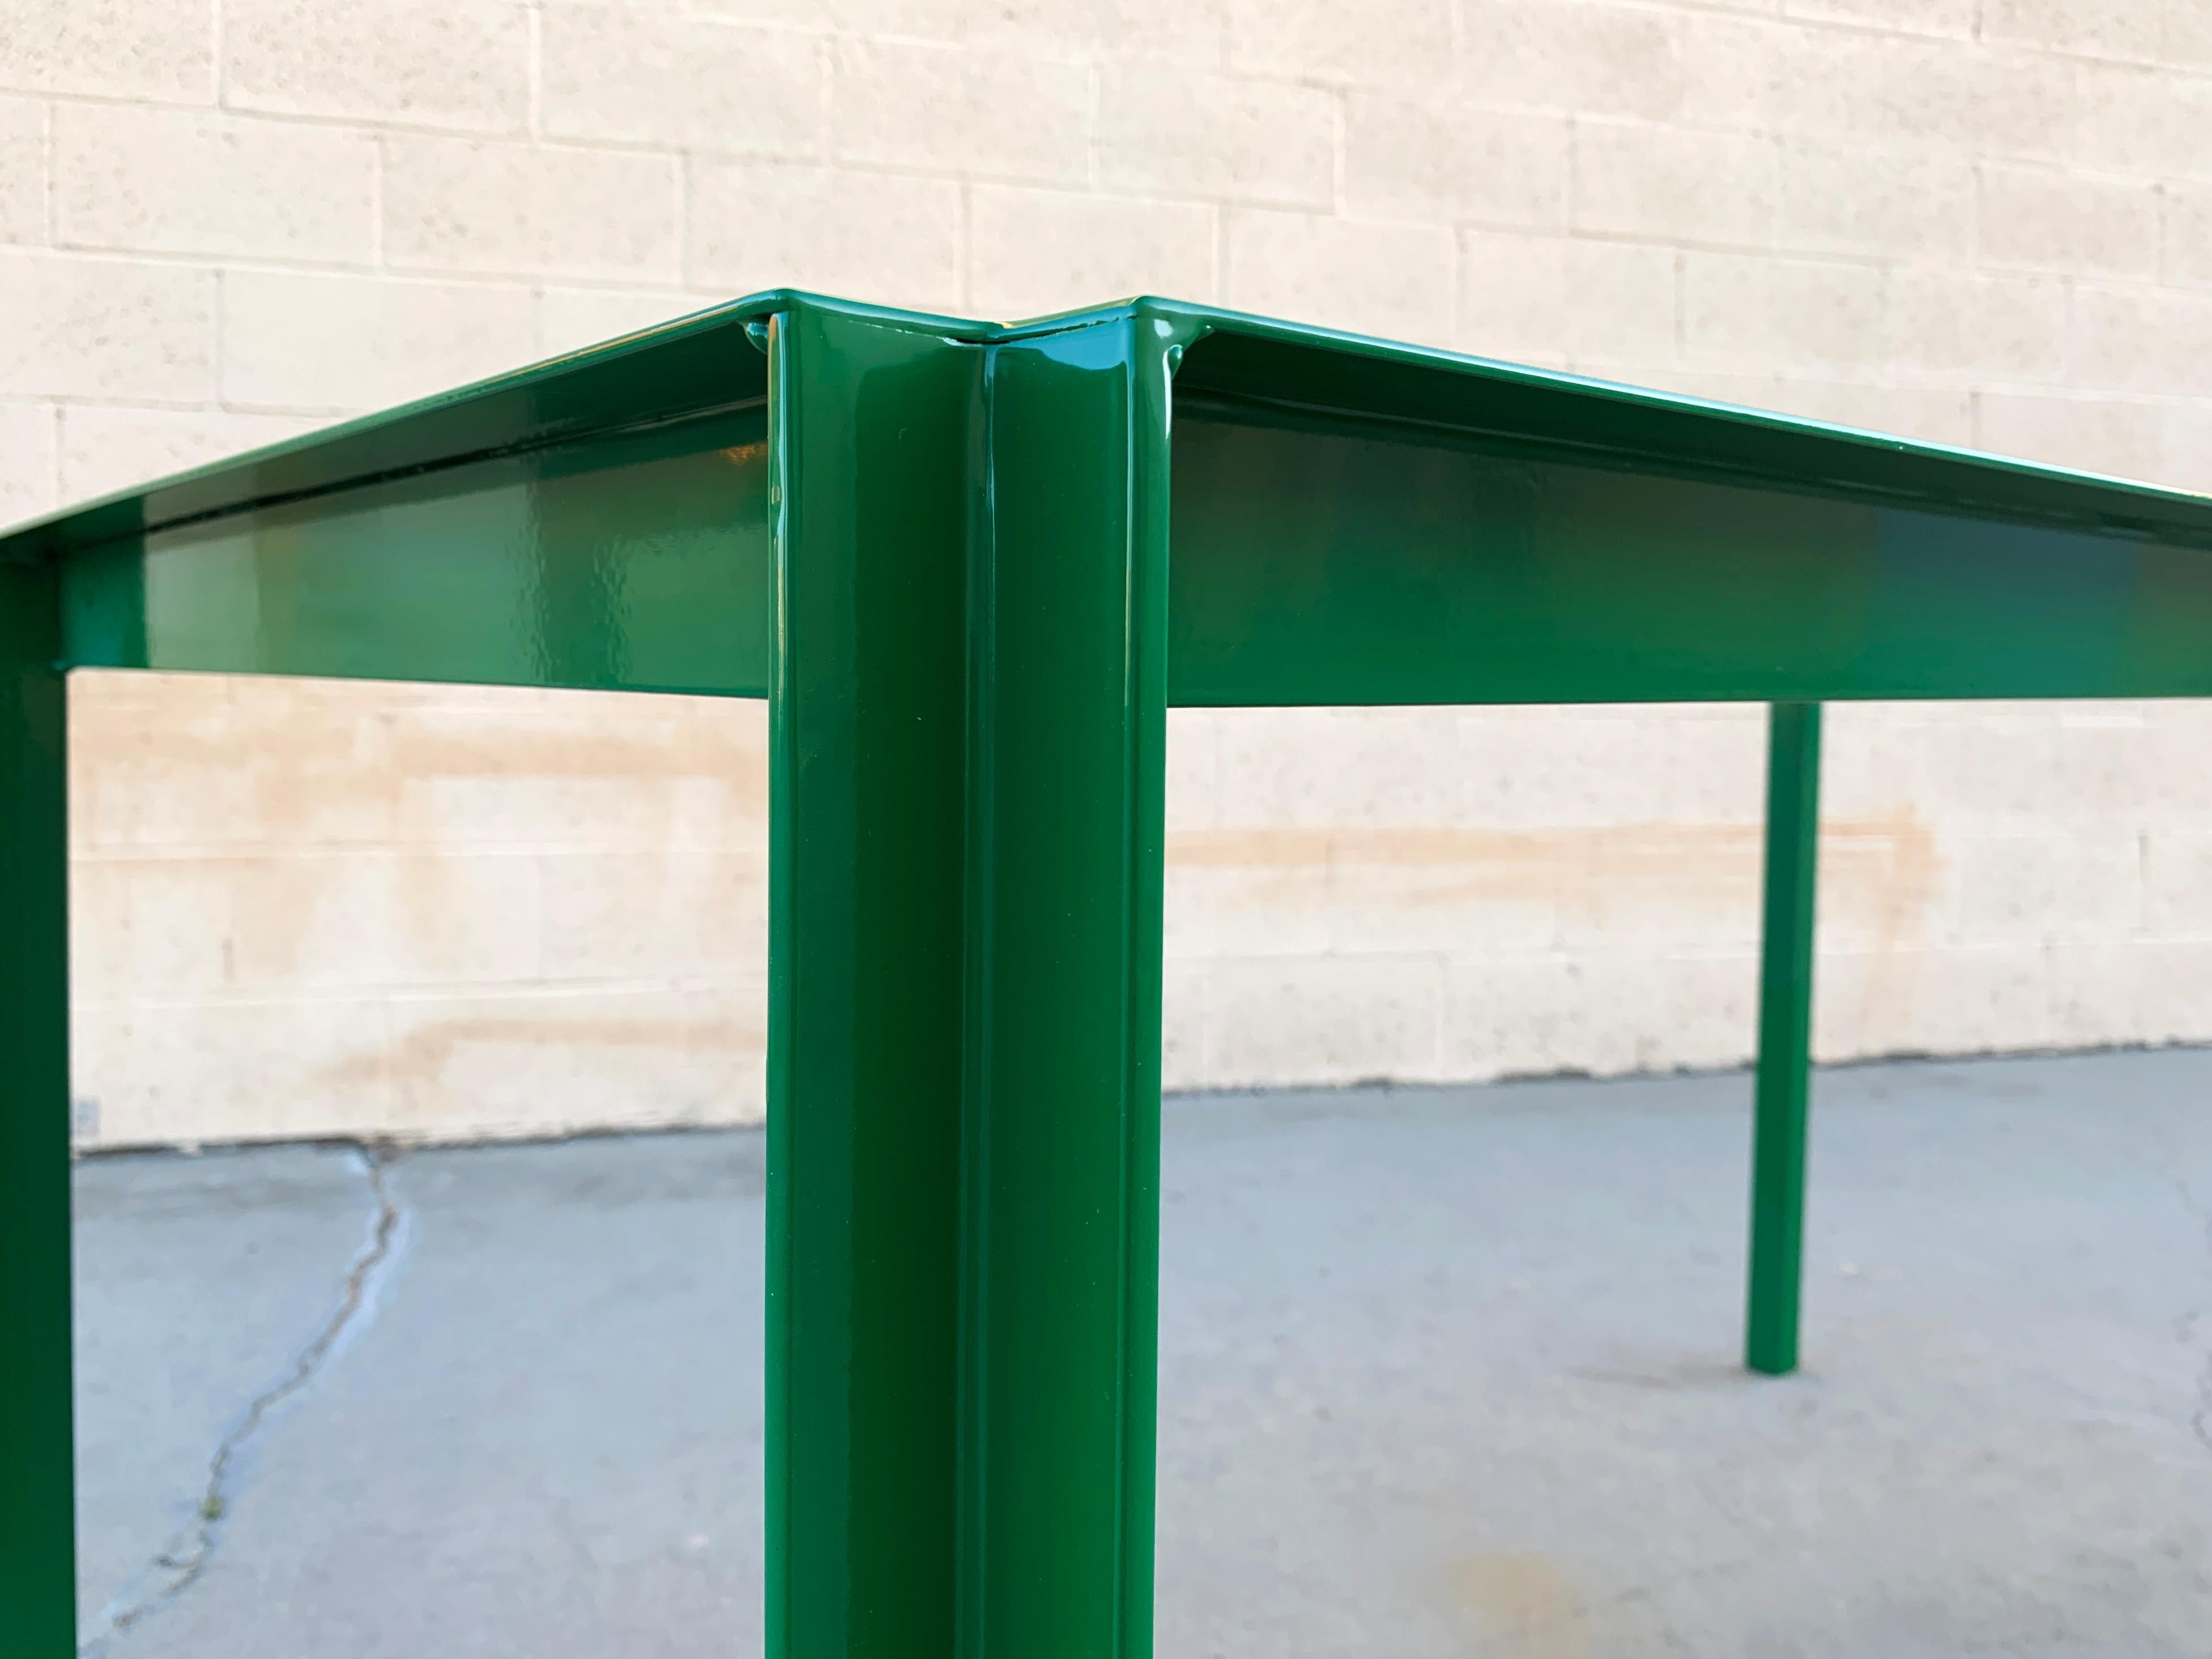 North American Tanker Inspired Steel Dining or Work Table Made to Order, Custom Colors For Sale